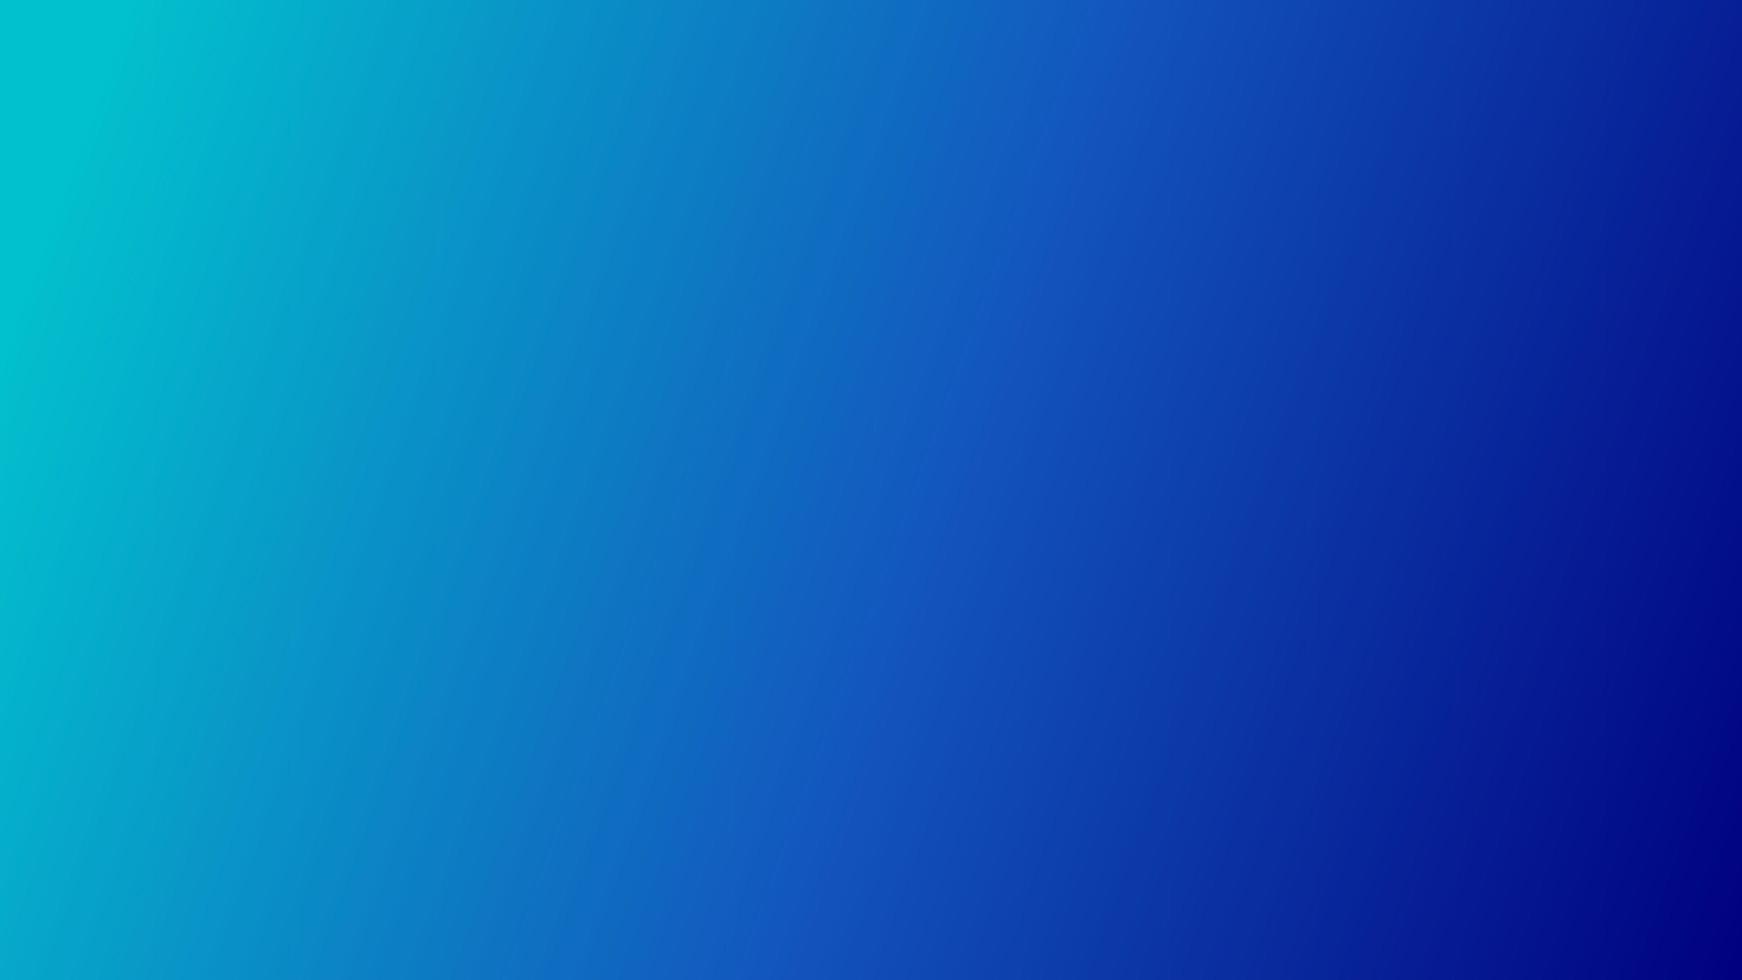 Modern simple royal blue gradient abstract background. Quotes and presentation types based background design. It is suitable for wallpaper, quotes, website, opening presentation, personal profile, etc photo